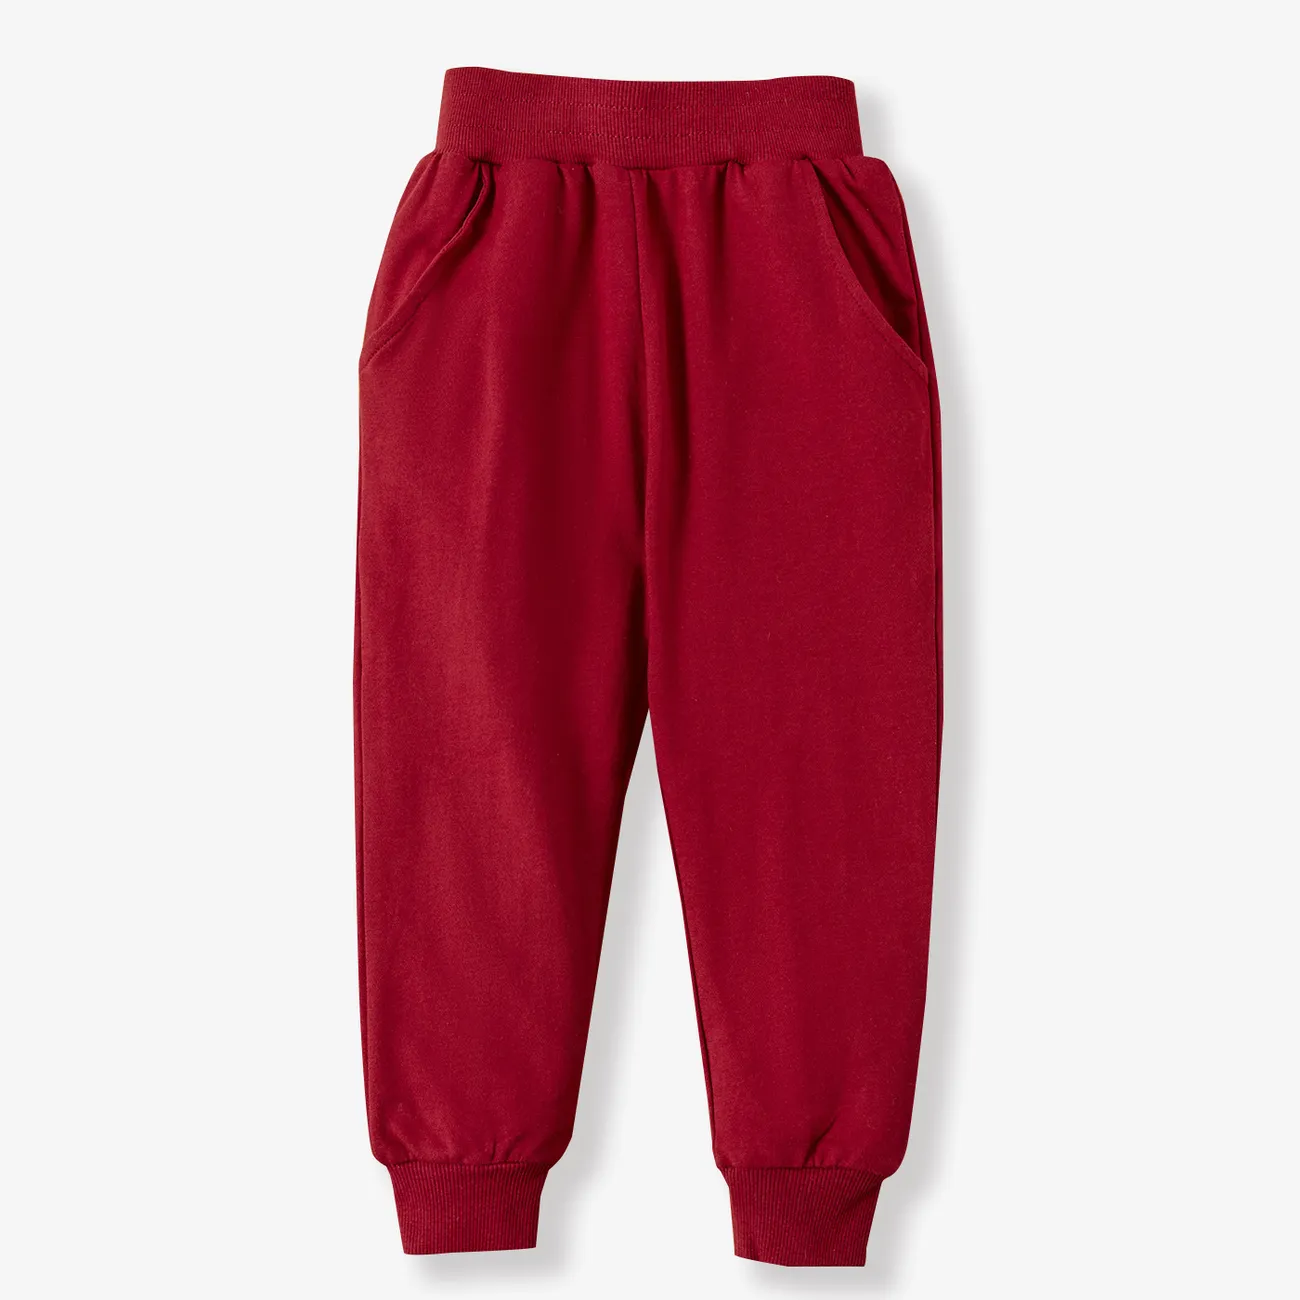 Baby / Toddler Solid Pocket Casual Pants Red big image 1